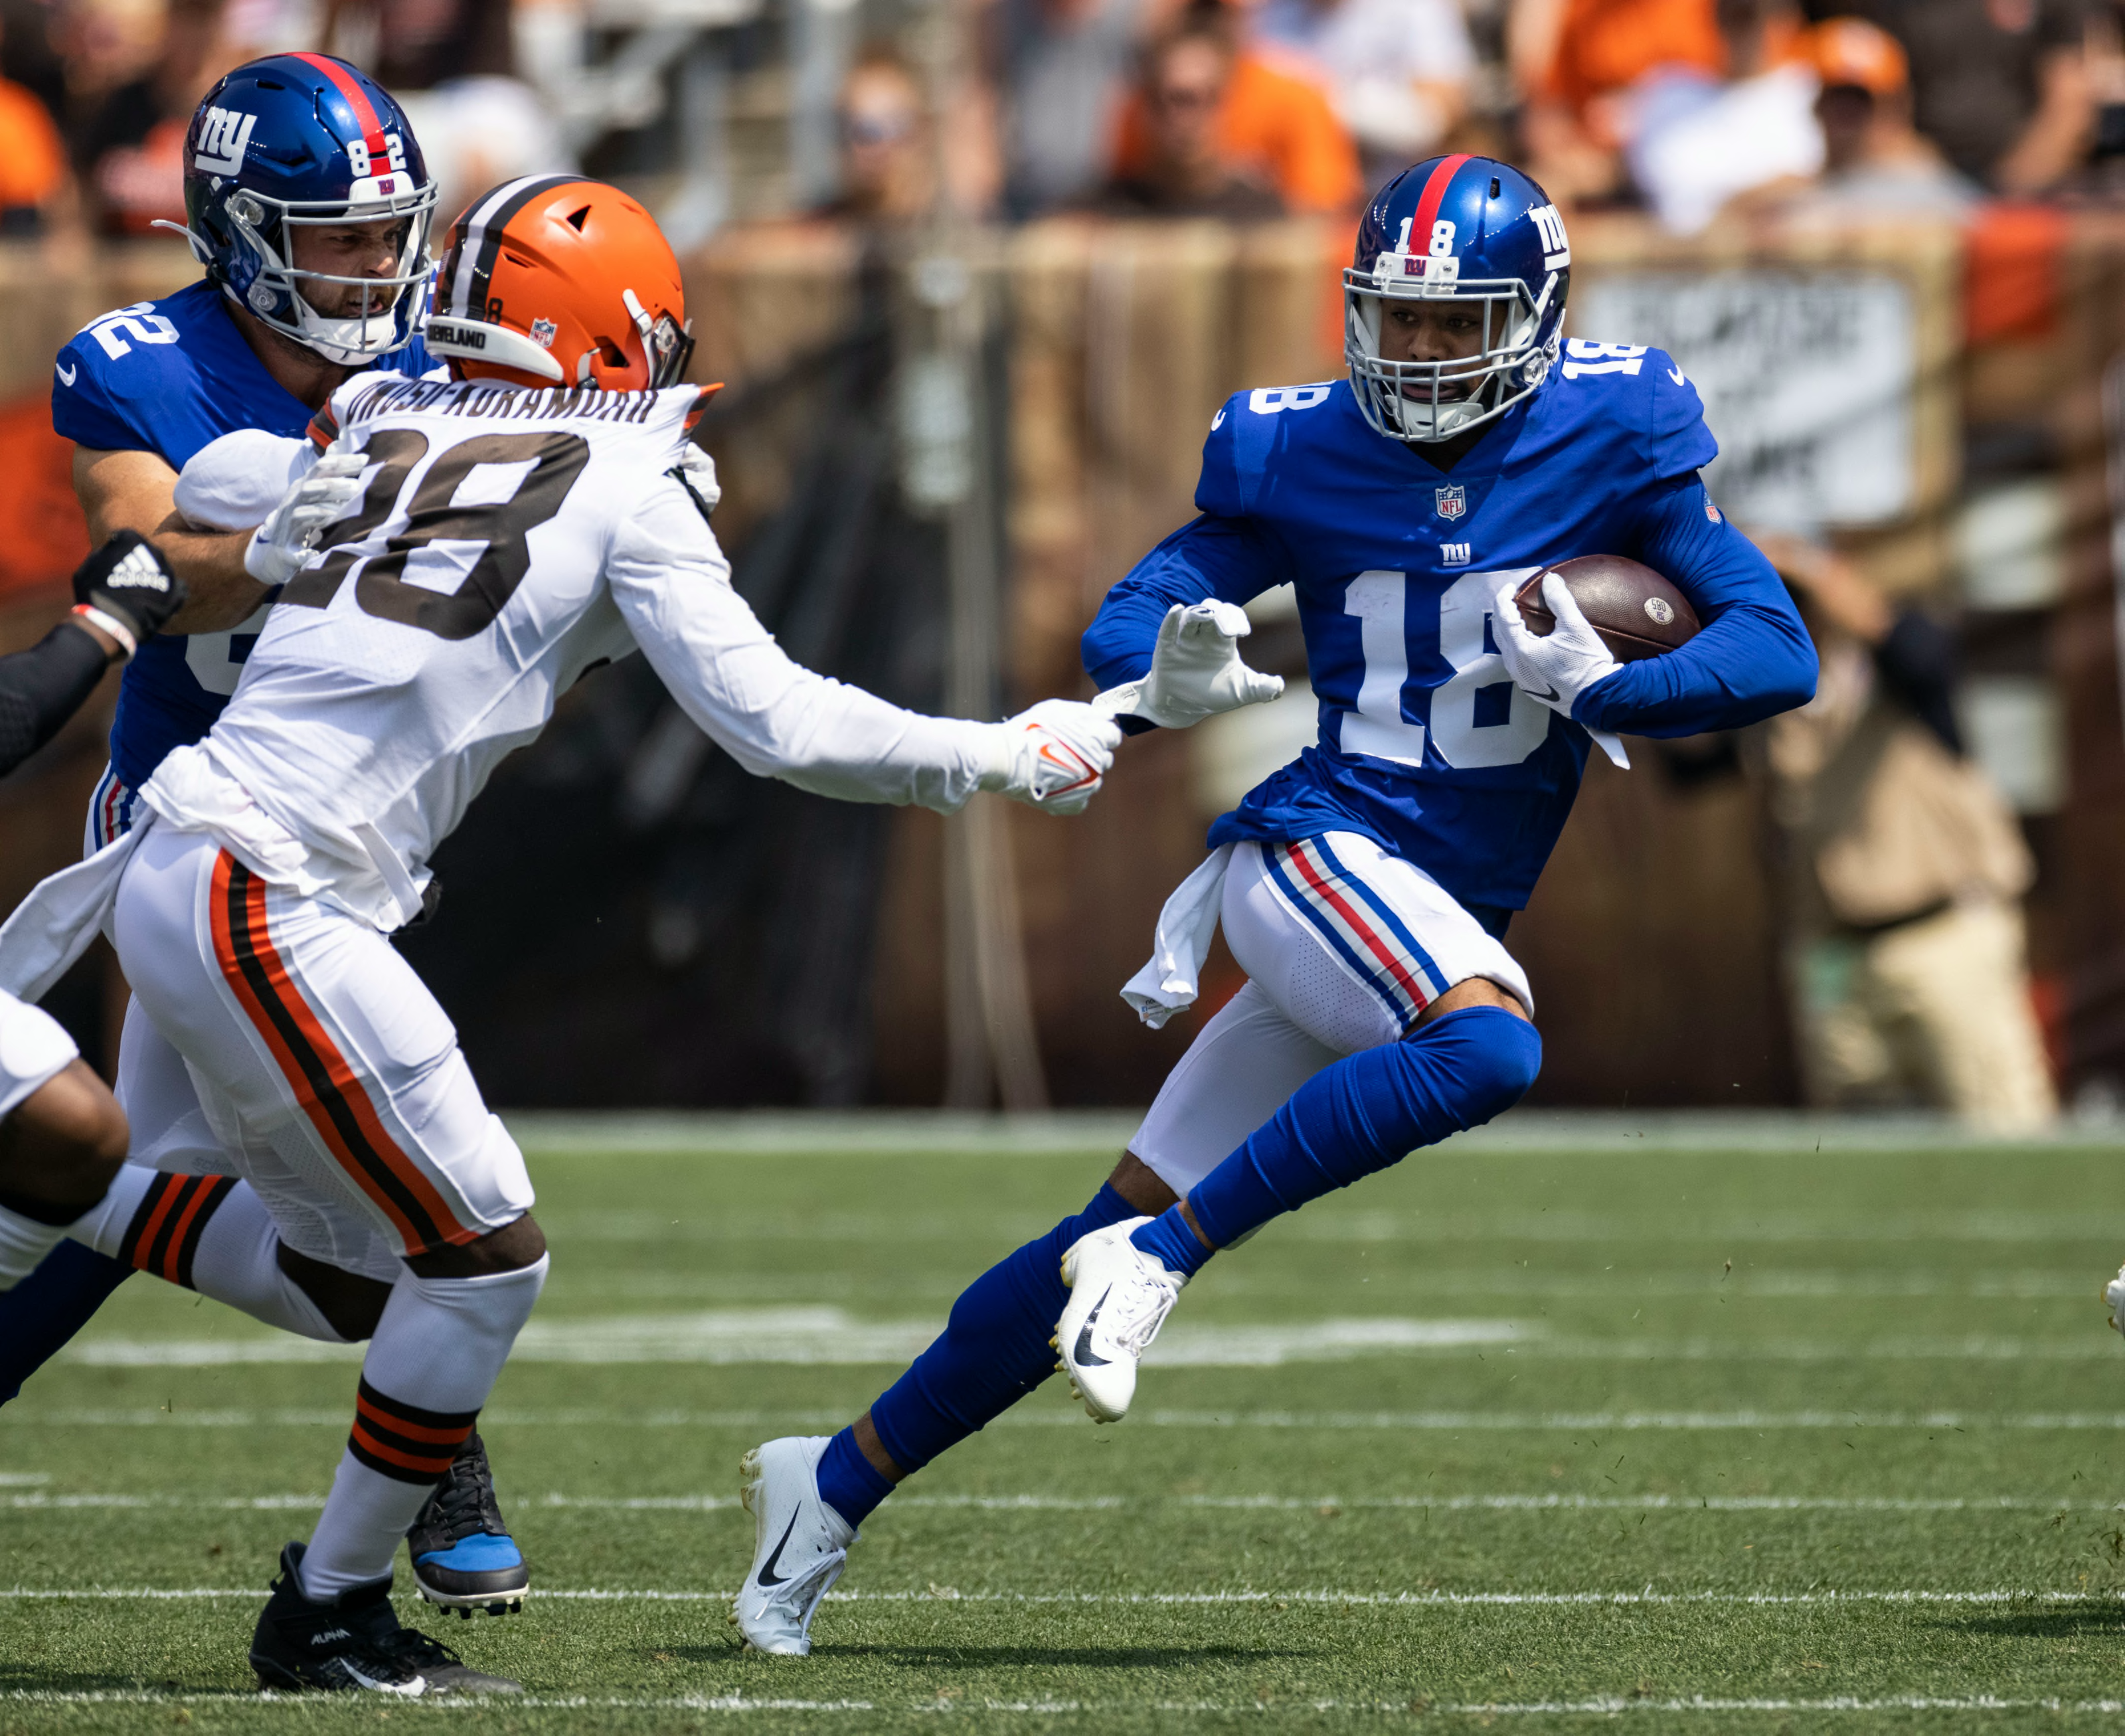 These wide receivers earned a spot on the NY Giants roster vs. Browns